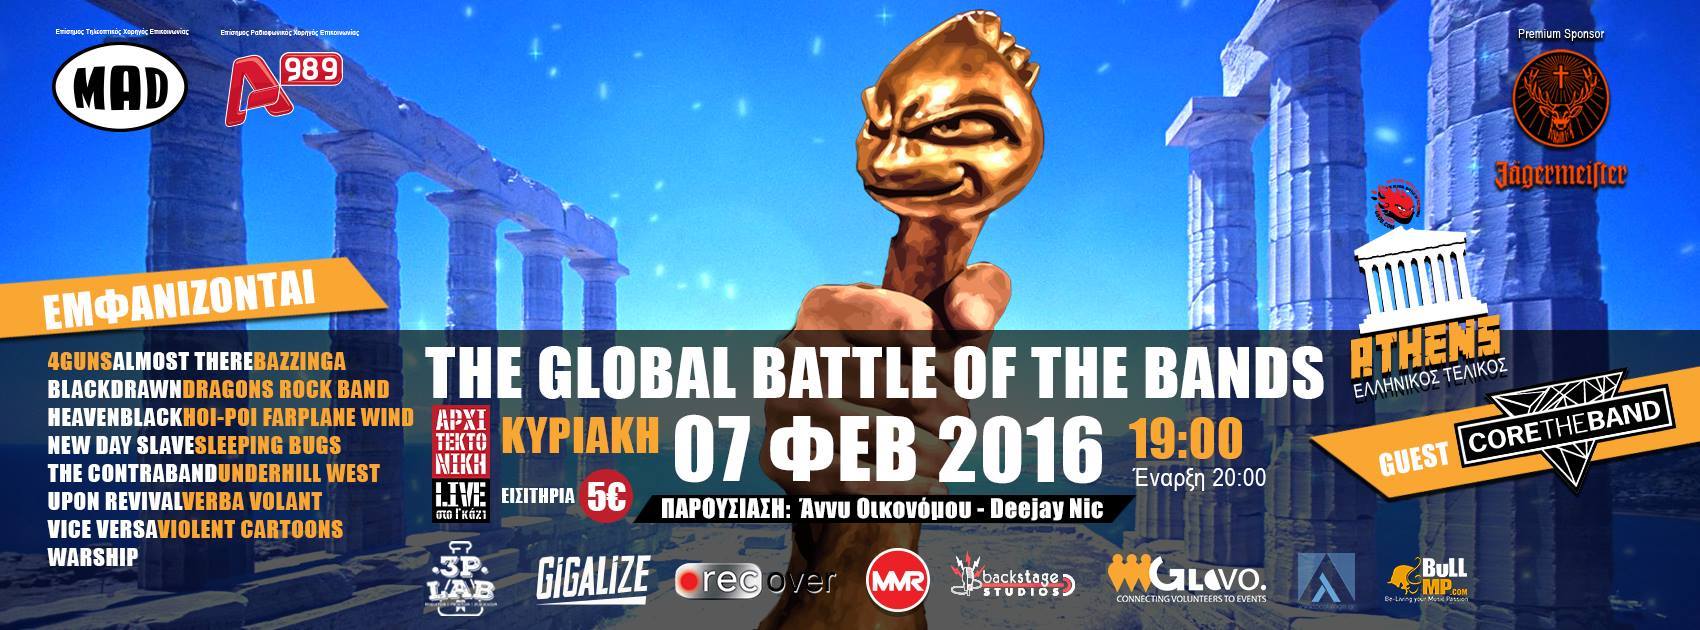 global-battle-of-the-bands-2016